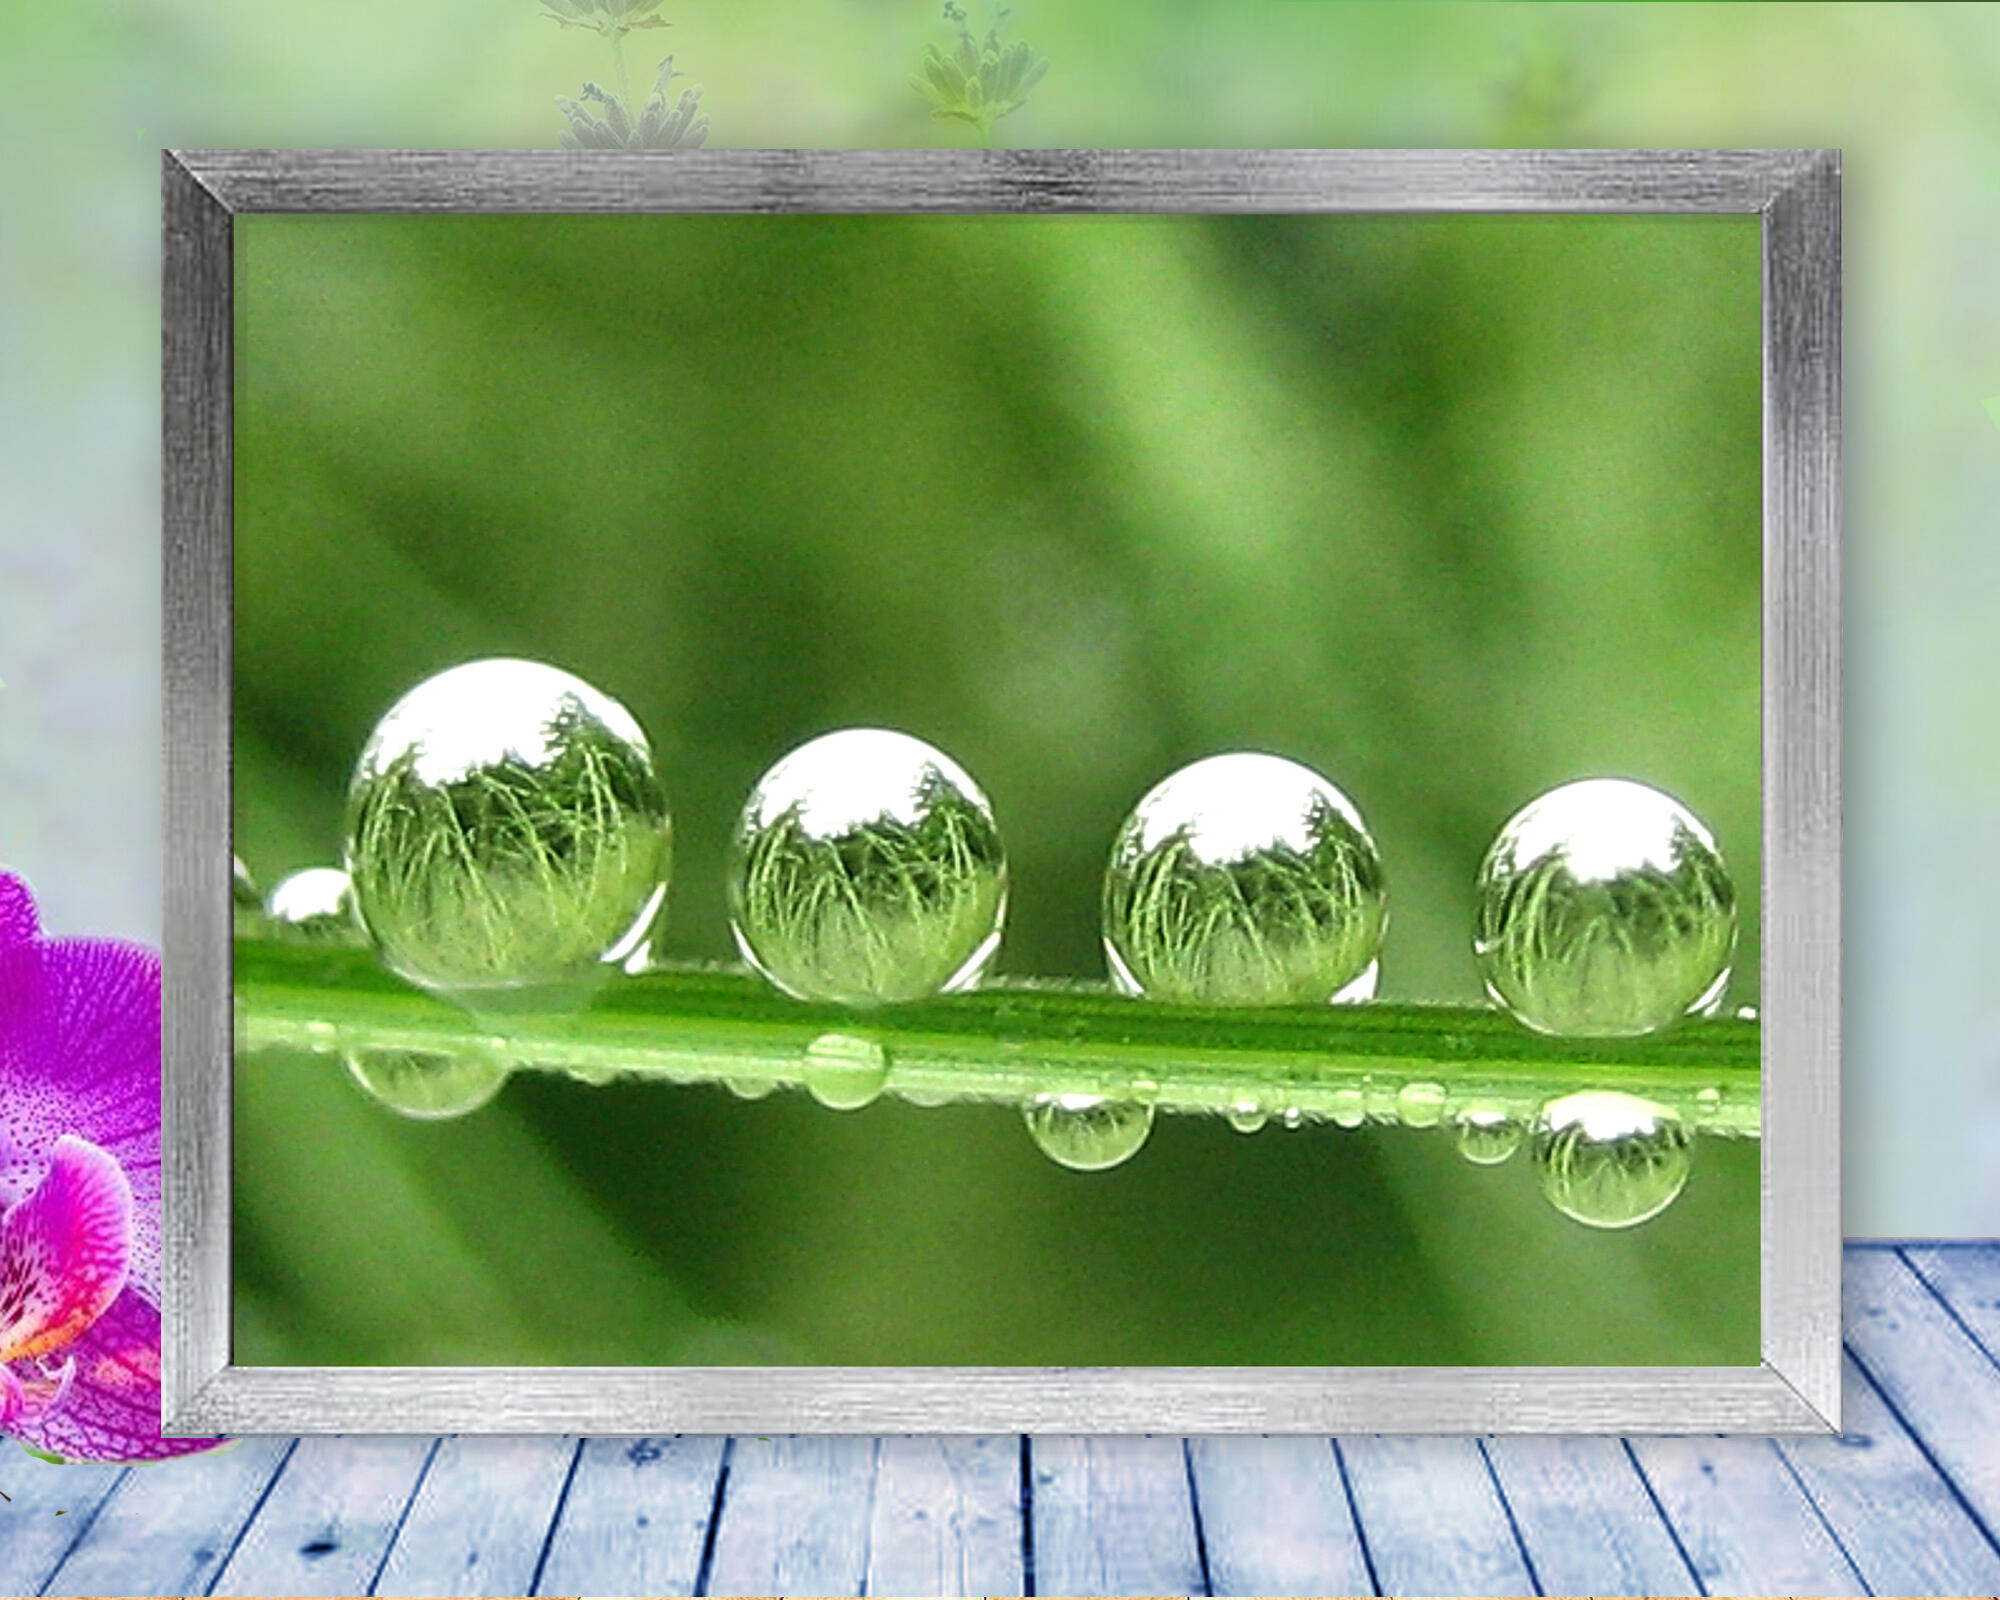 Four drops of water rest on a blade of grass reflecting the world around them, in this beautiful, peaceful, nature photo with poem-Water Parks by The Poetry of Nature